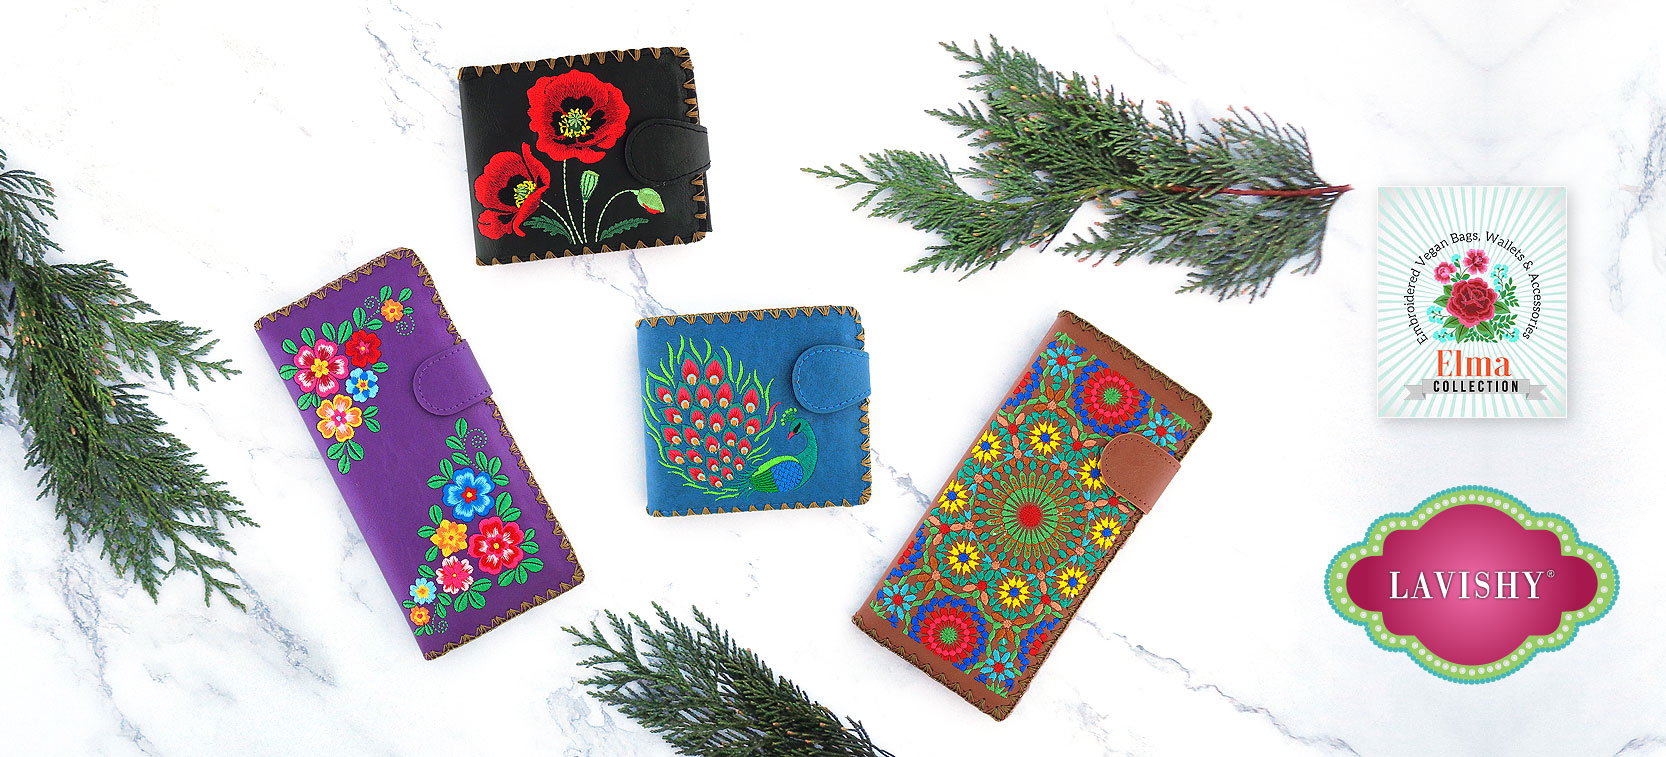 lavishy wholesale embroided vegan wallets to gift shops, clothing and fashion accessories boutiques, book stores in Canada, USA & worldwide.